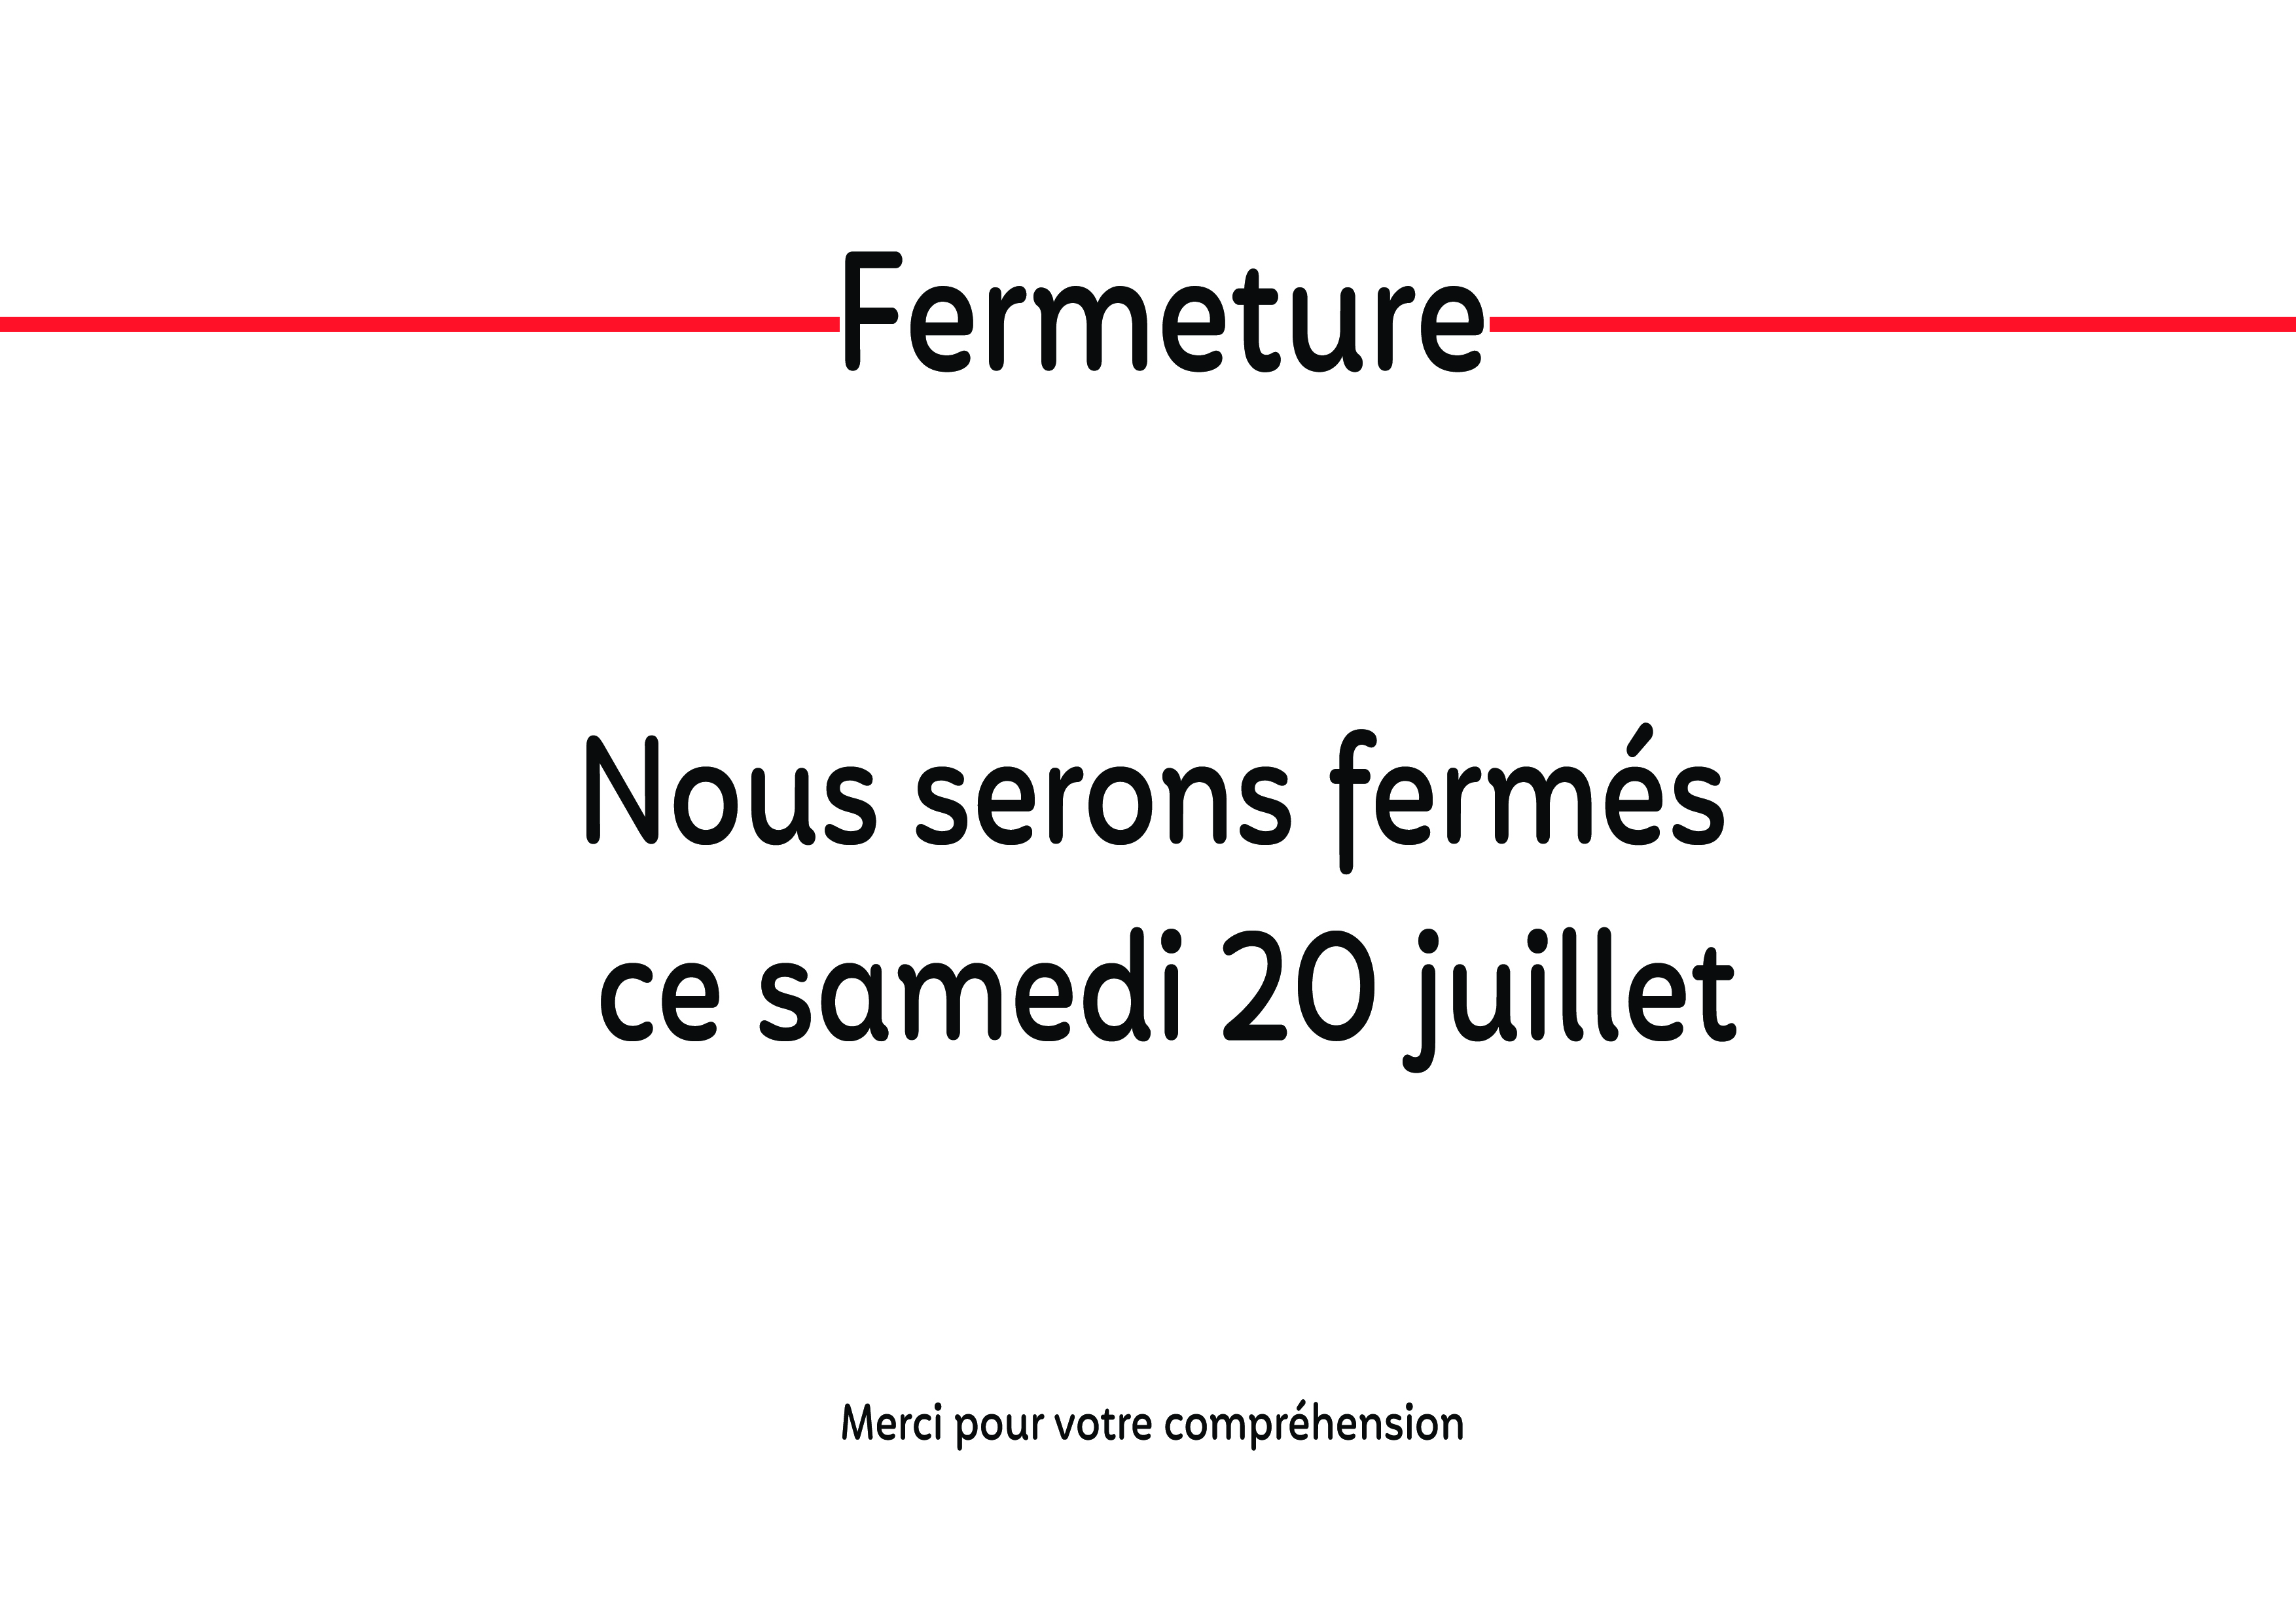 Fermeture magasin